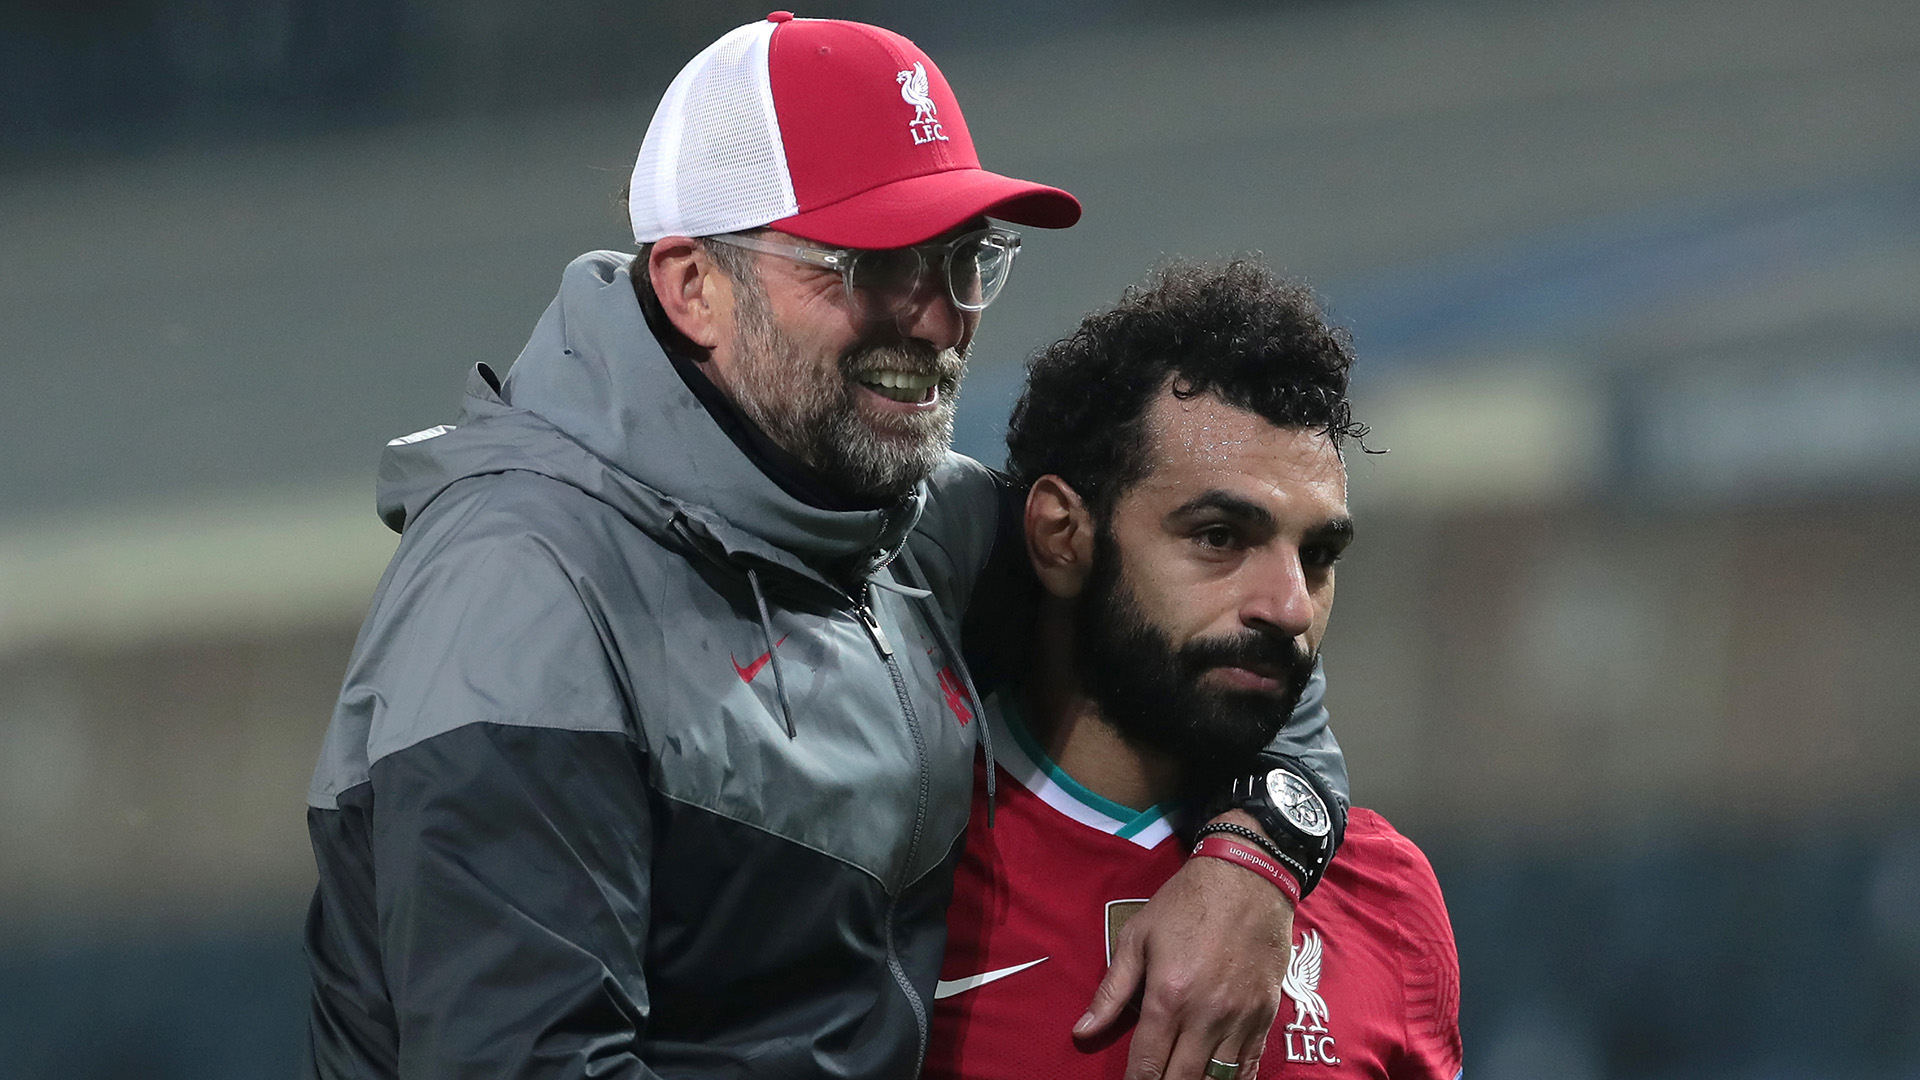 Egypt vow they won't call up Salah for Olympics unless Liverpool give green light